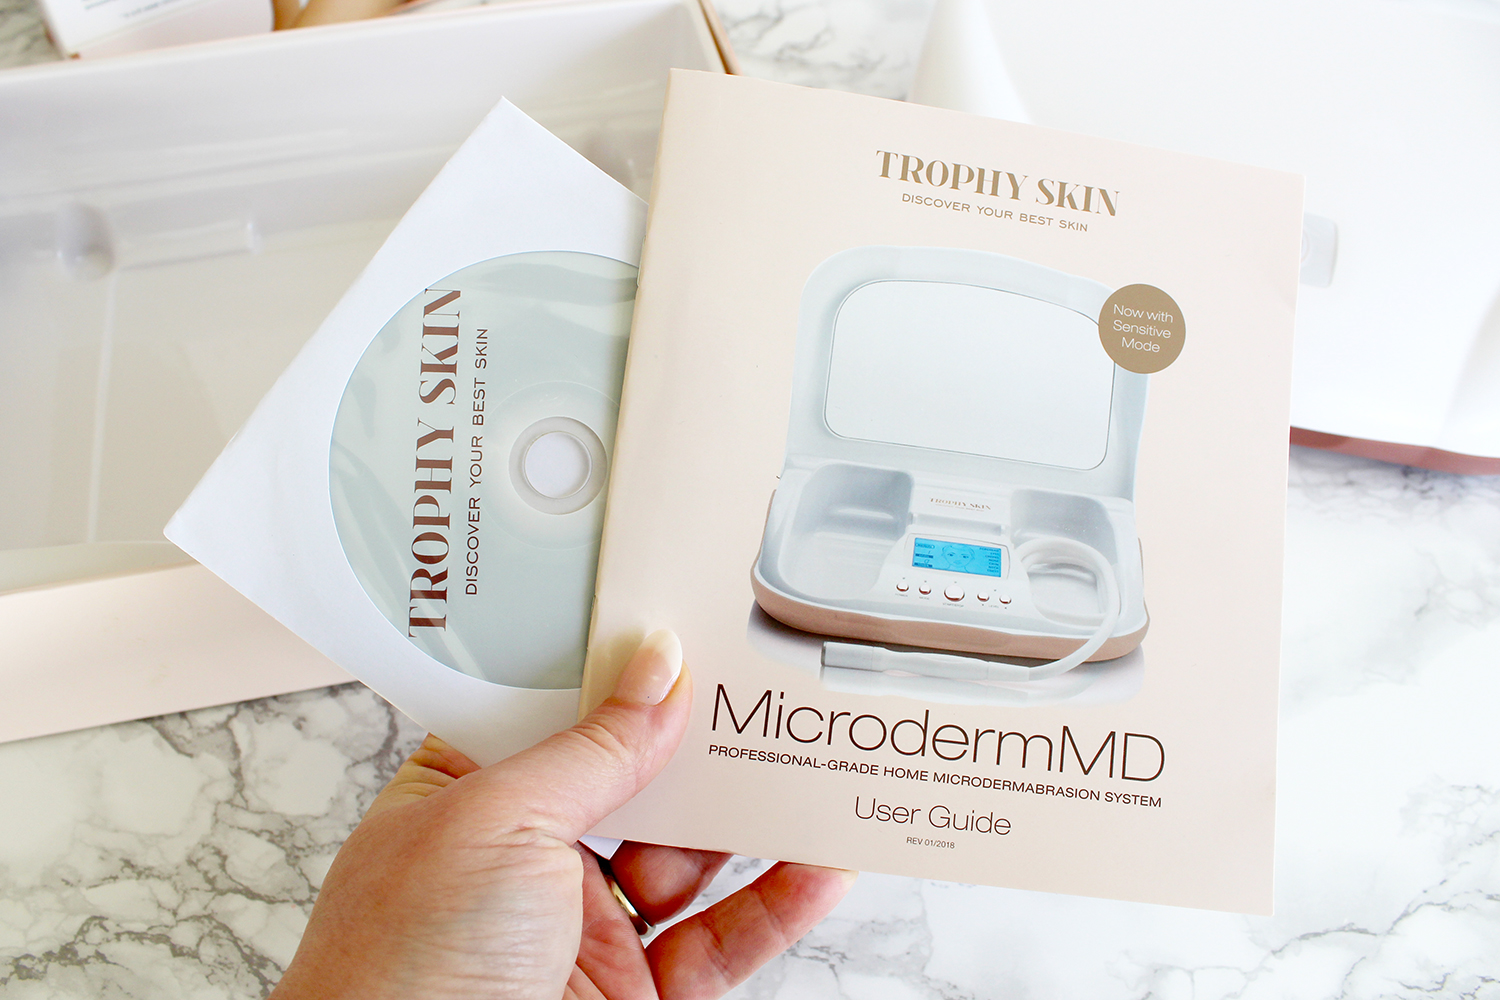 Southern Mom Loves: I Tried out the MicrodermMD from Trophy Skin